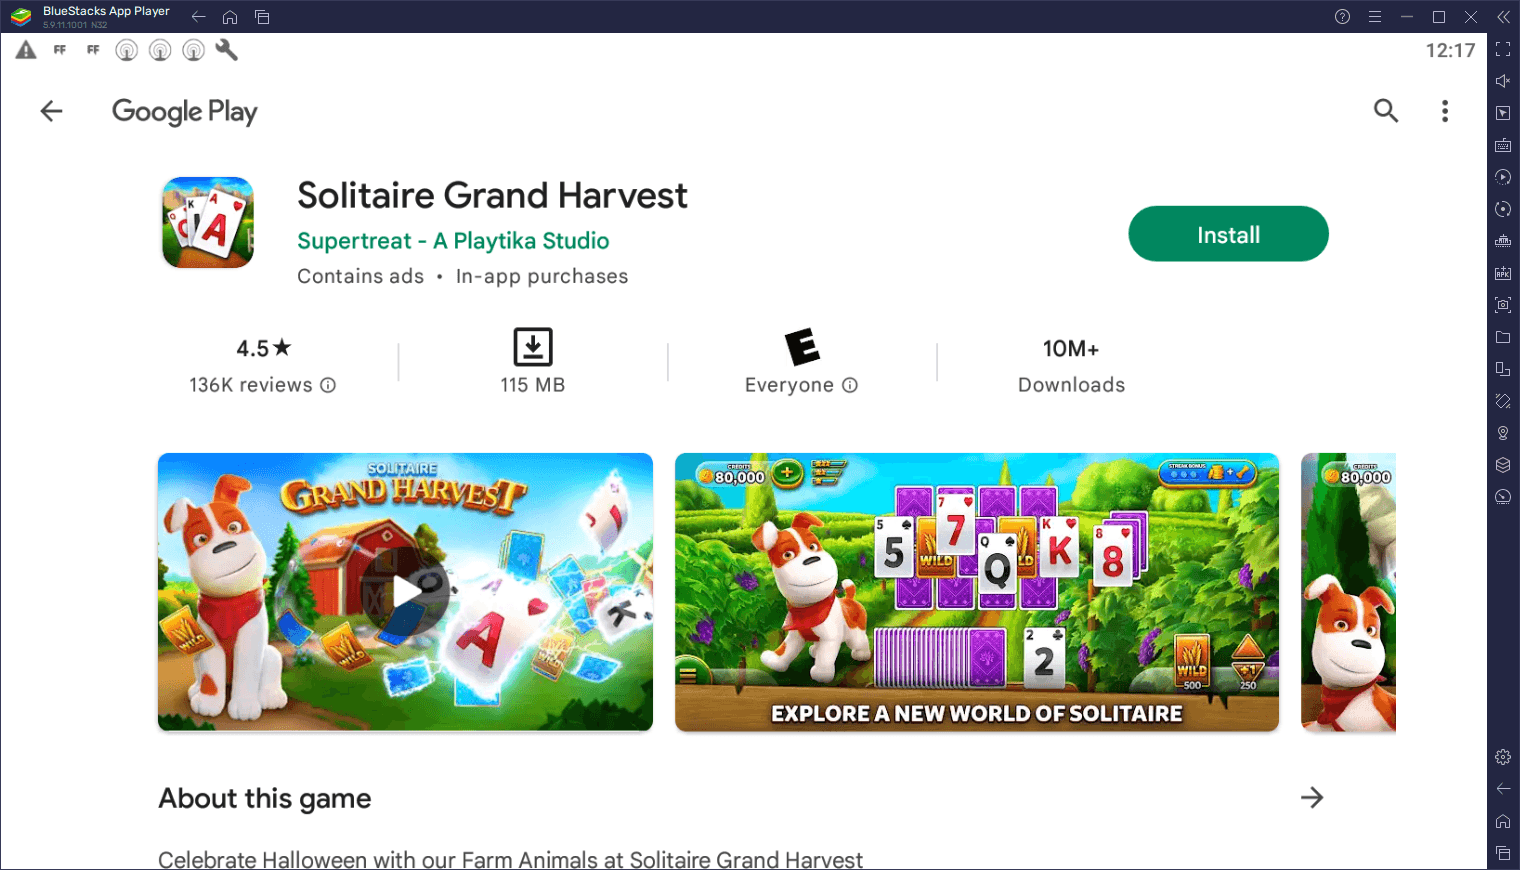 How to Play Solitaire Grand Harvest on PC with BlueStacks